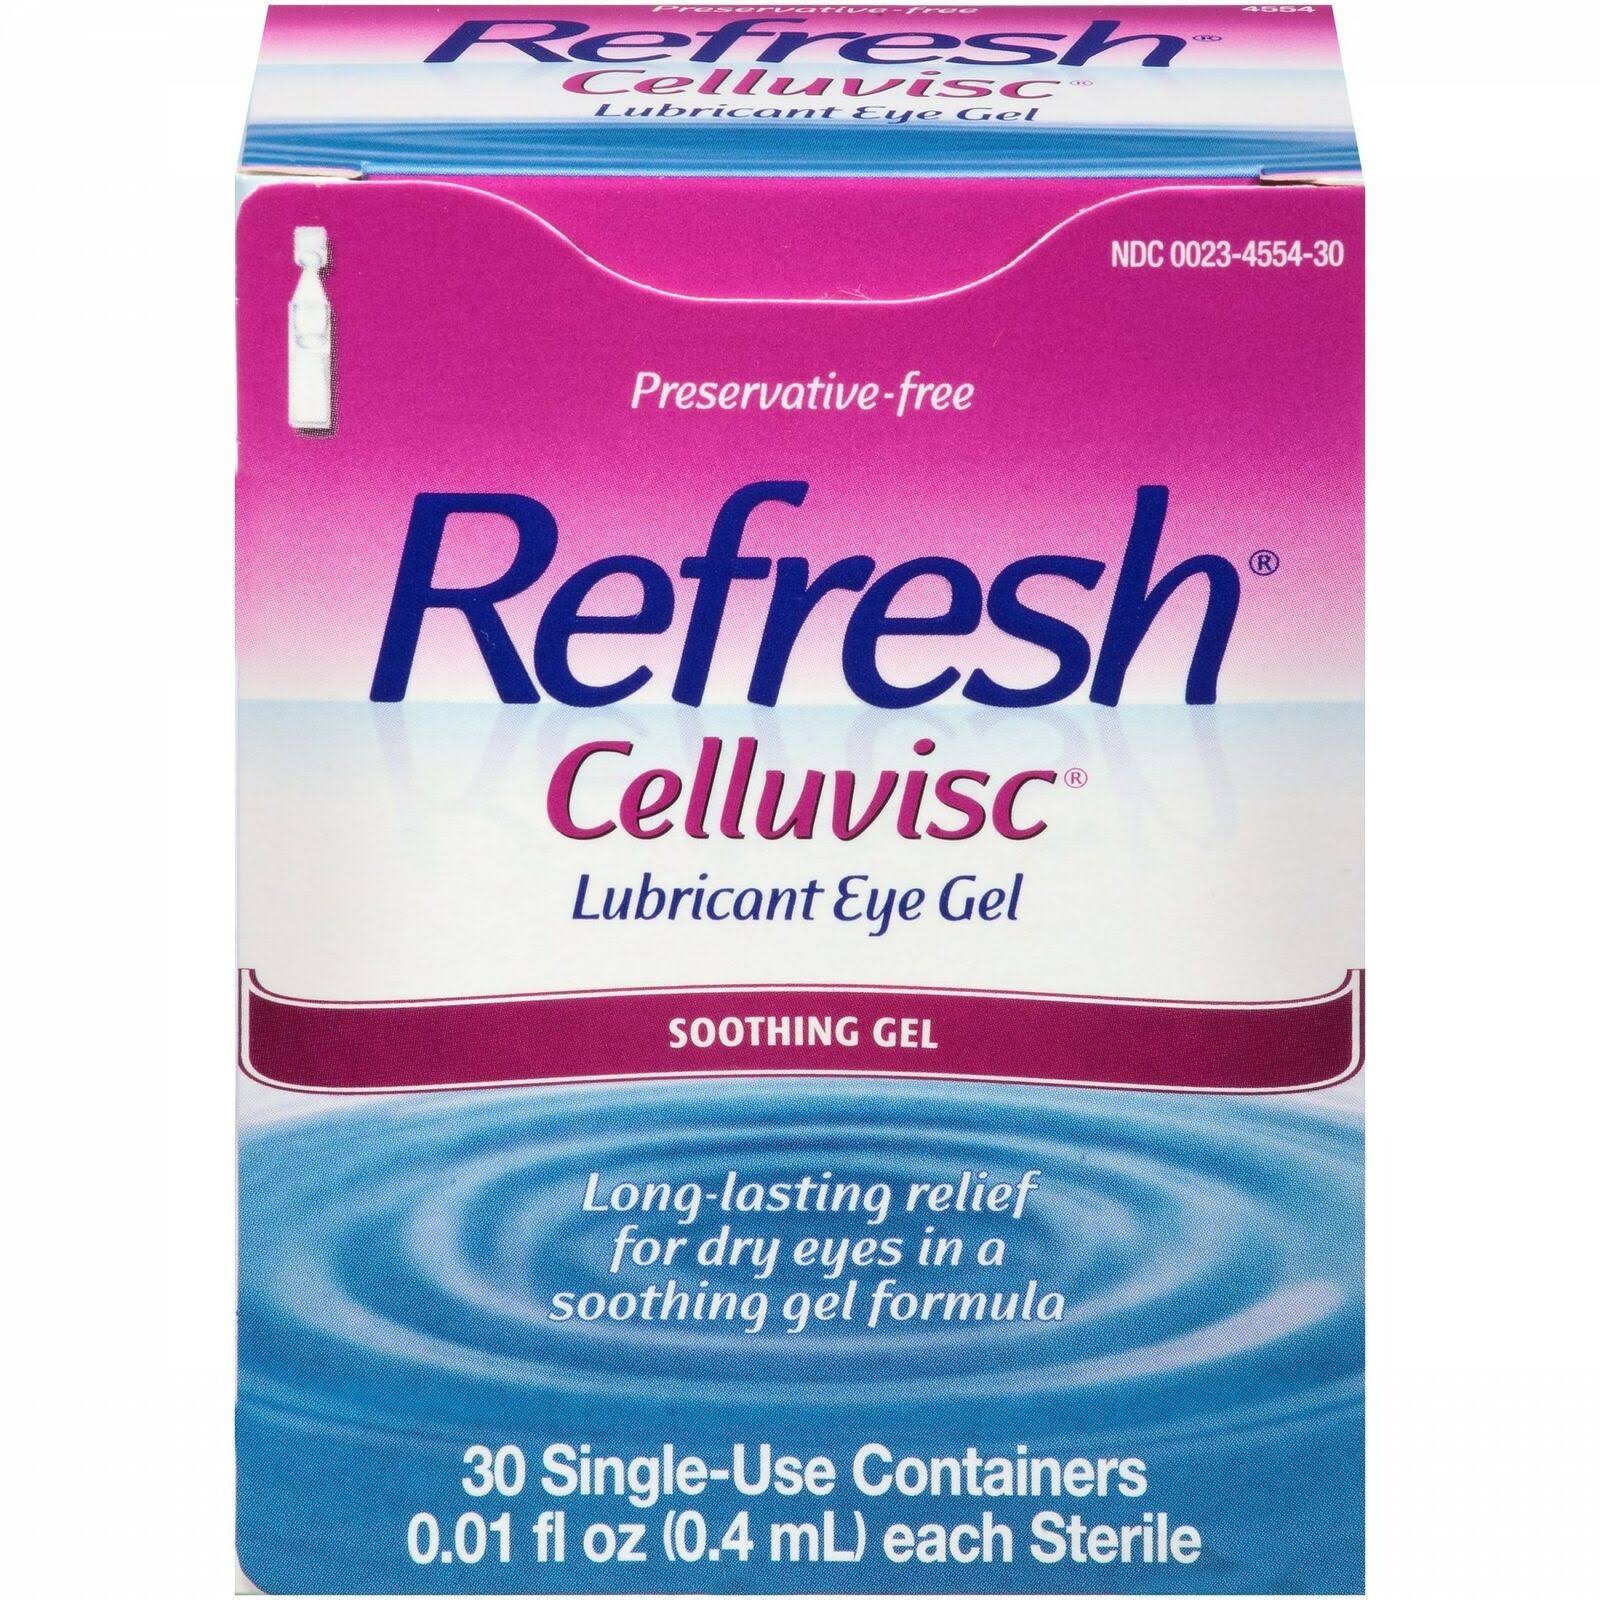 Allergan Refresh Celluvisc Lubricant Eye Drops - 30 Sterile Single-Use Containers, .4ml